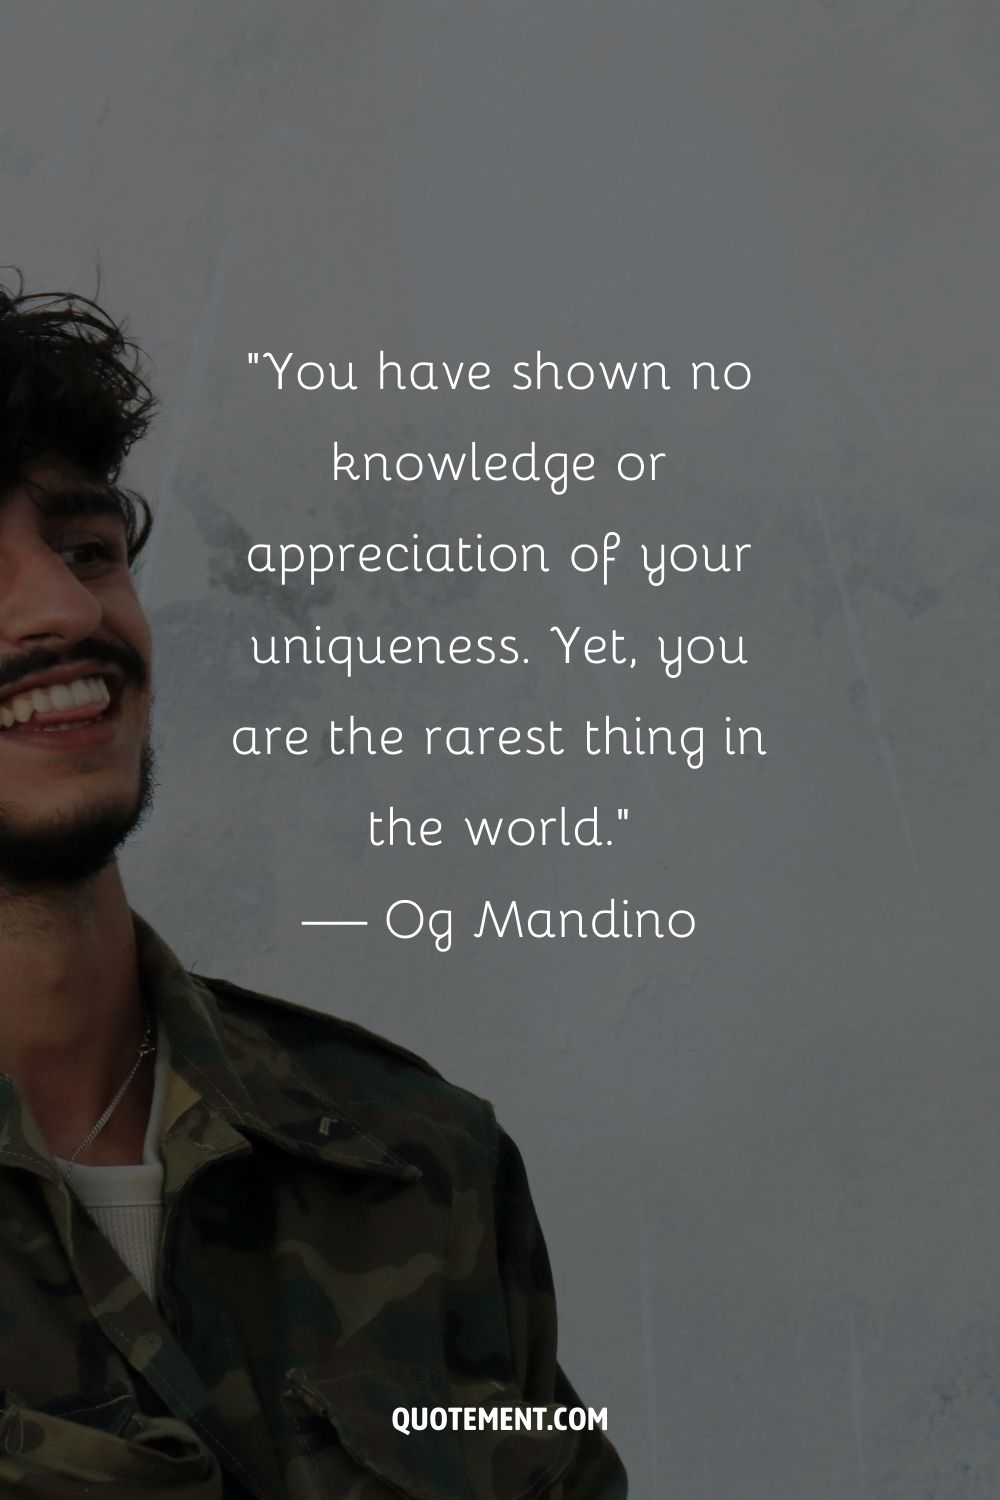 “You have shown no knowledge or appreciation of your uniqueness. Yet, you are the rarest thing in the world.” — Og Mandino